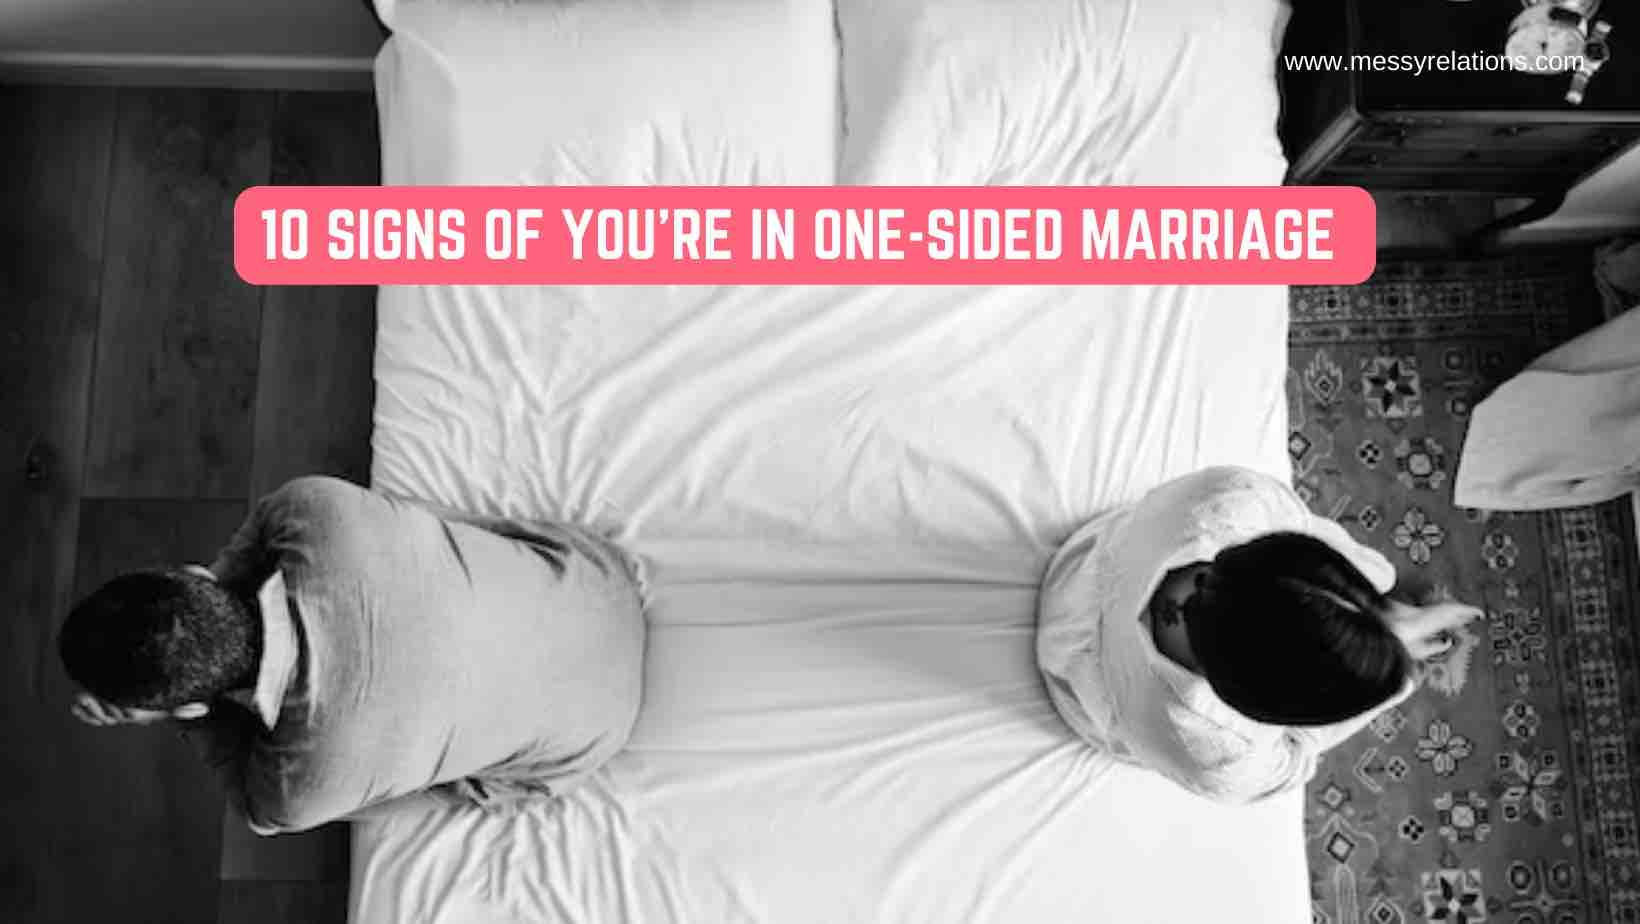 One-Sided Marriage